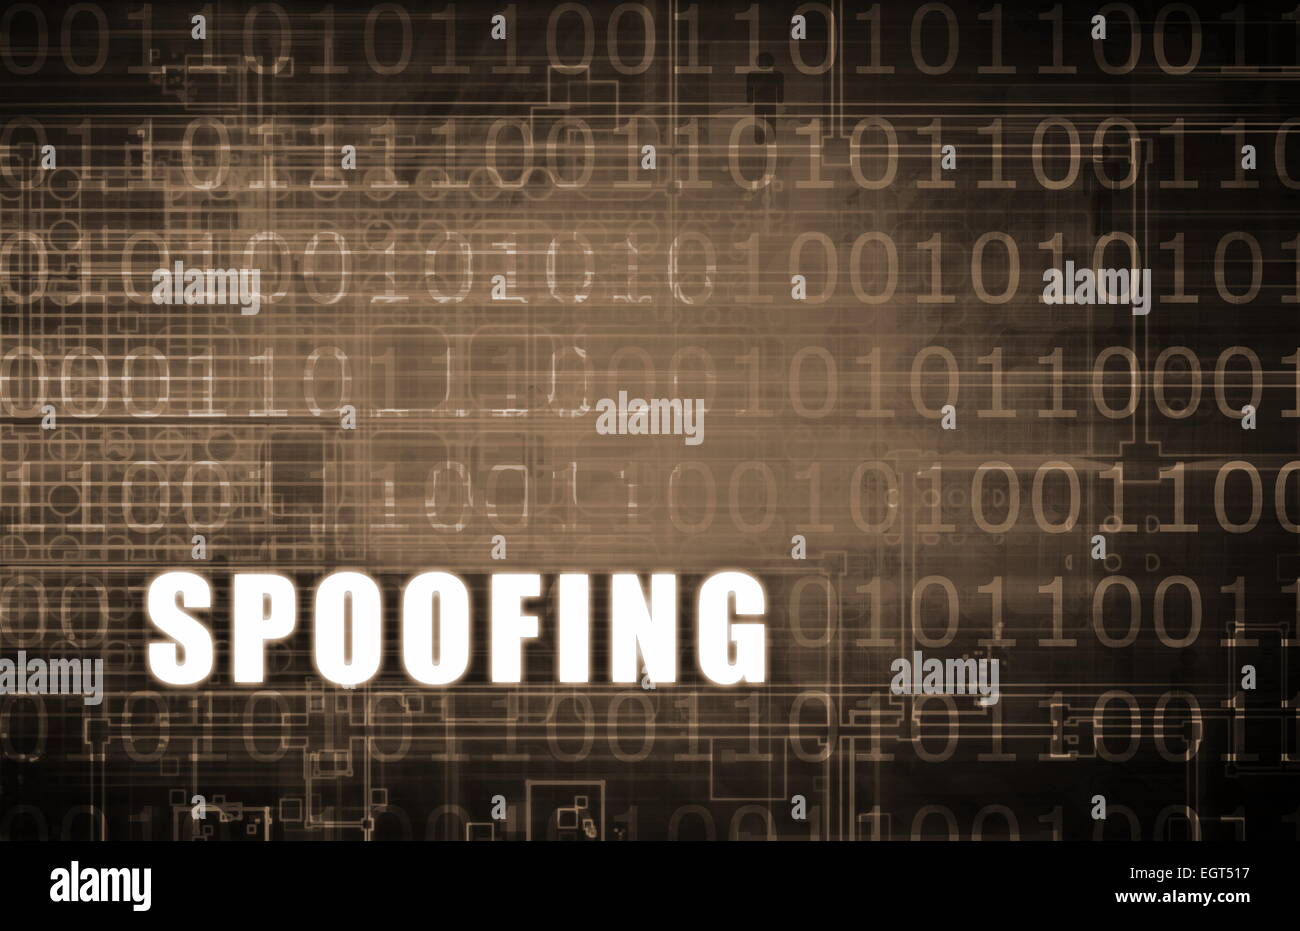 IP Spoofing on a Digital Binary Warning Abstract Stock Photo